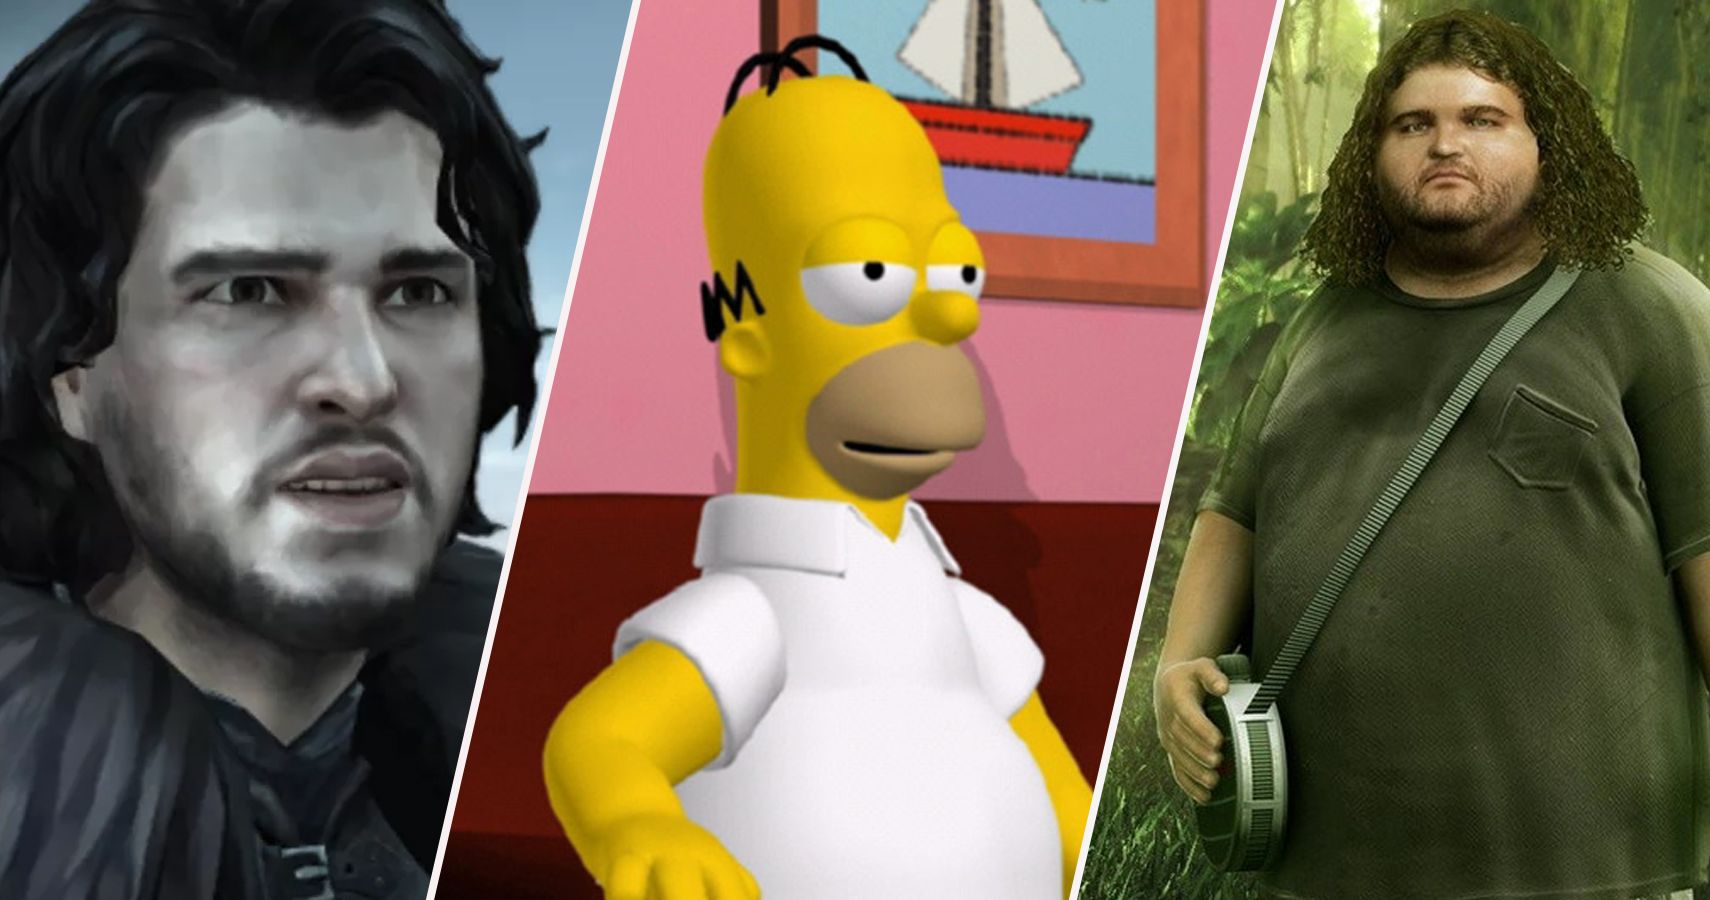 10 TV Shows Based on Video Games, Ranked According to Critics